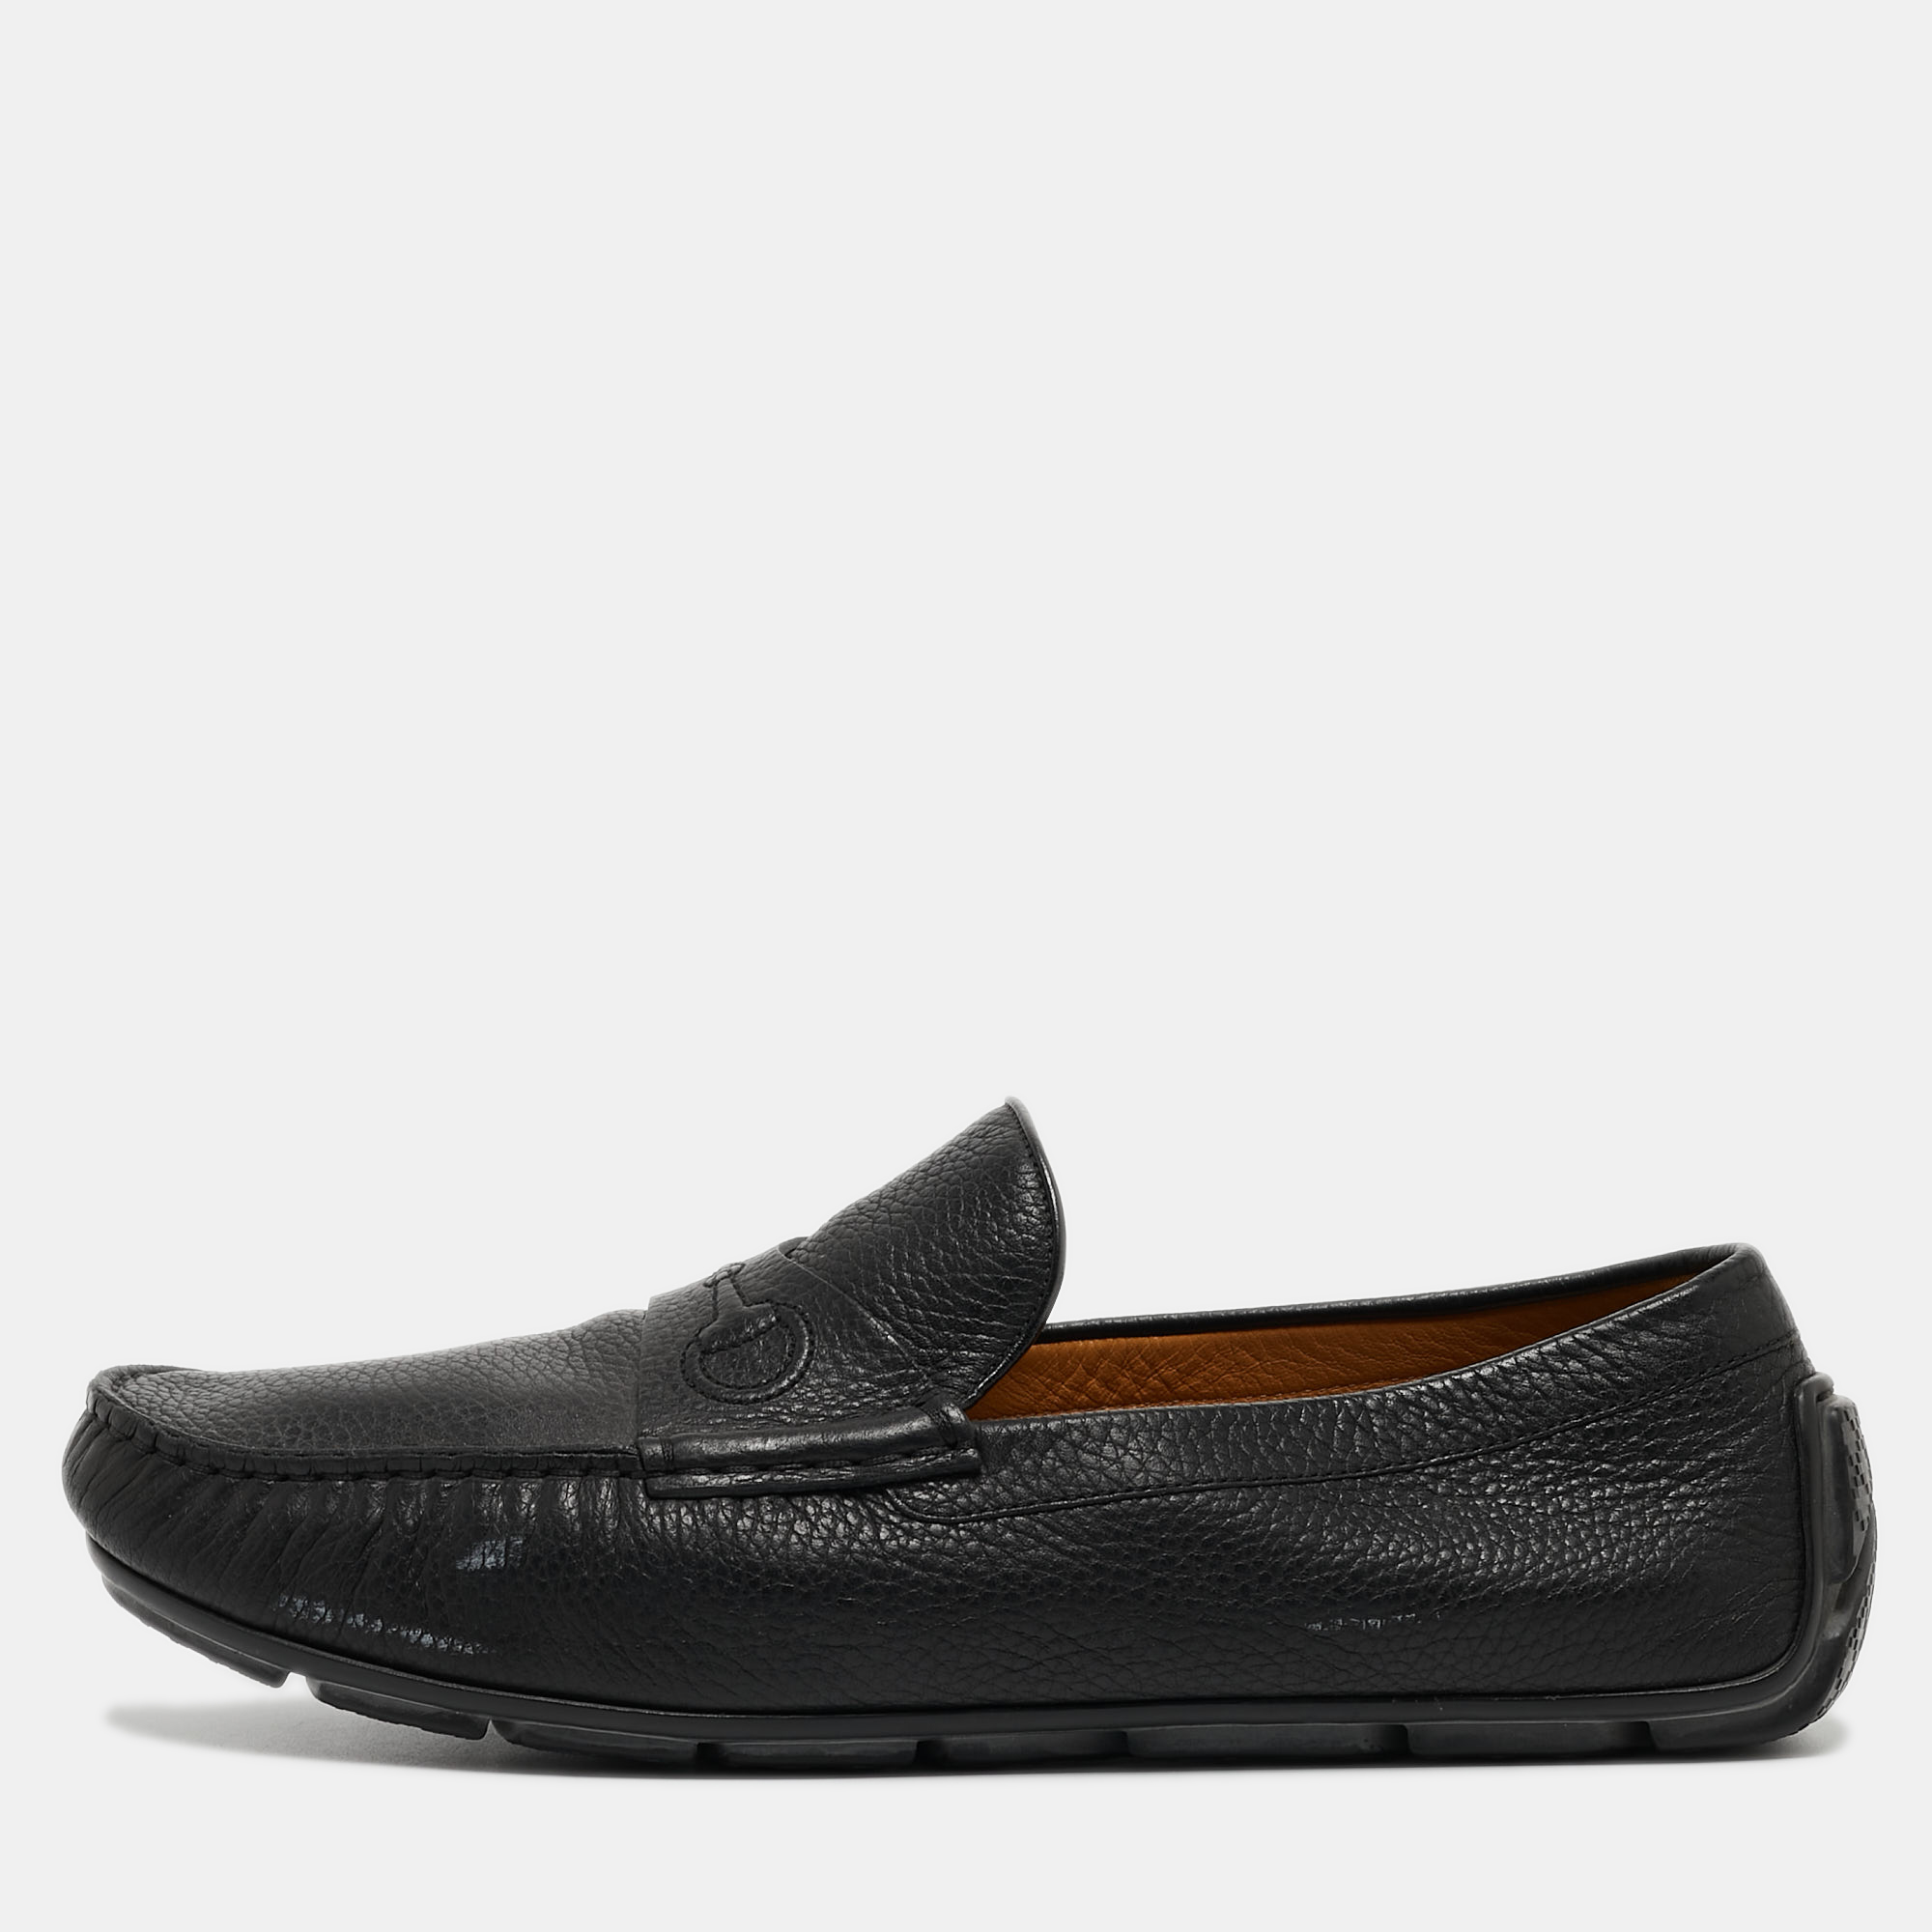 Pre-owned Gucci Black Leather Slip On Loafers Size 43